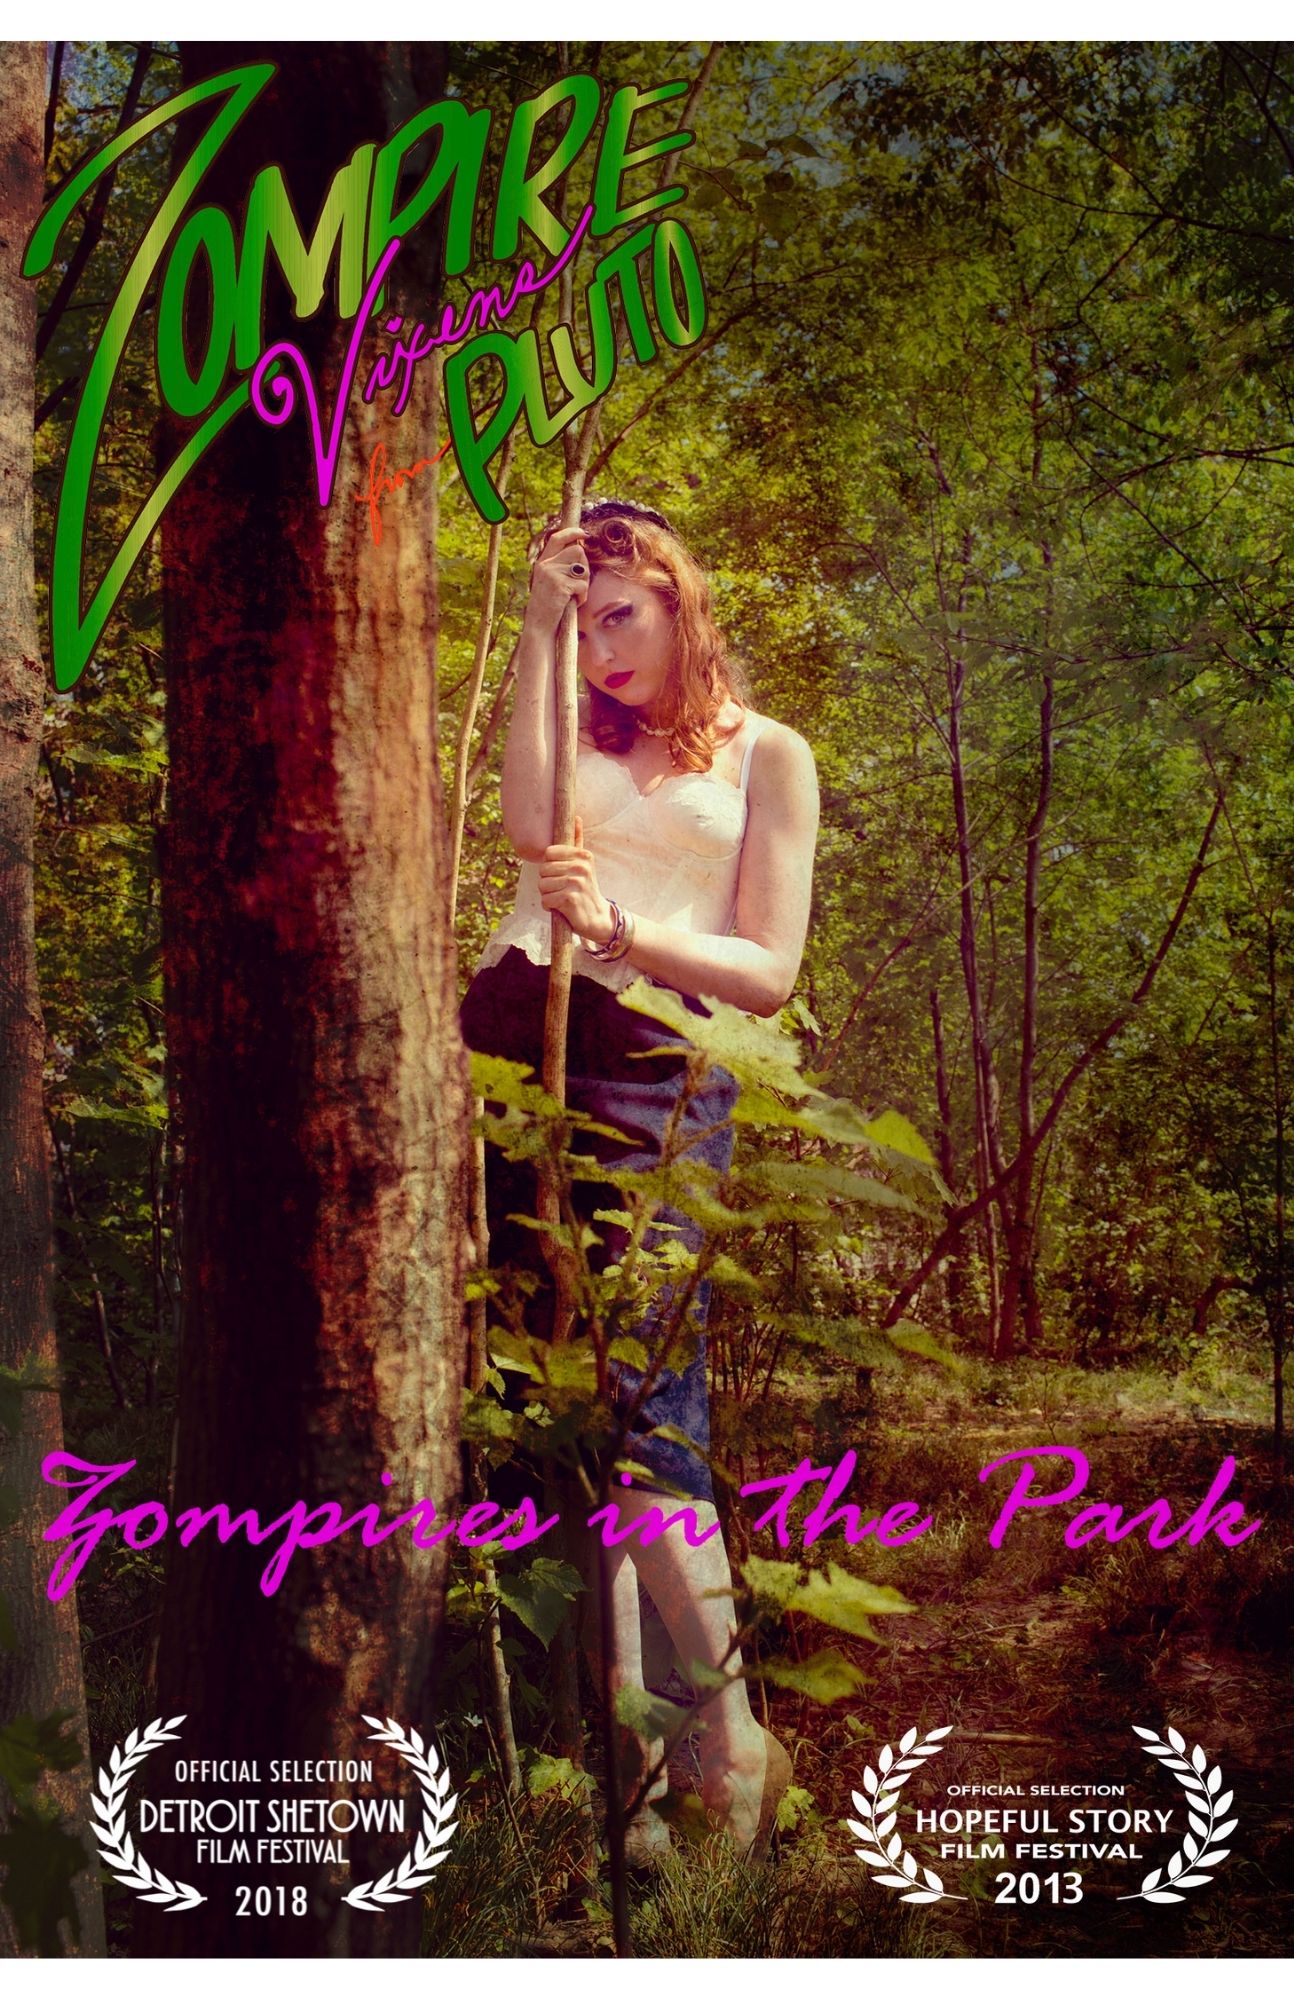 ZOMPIRES IN THE PARK, Jenna Payne, writer, director, producer